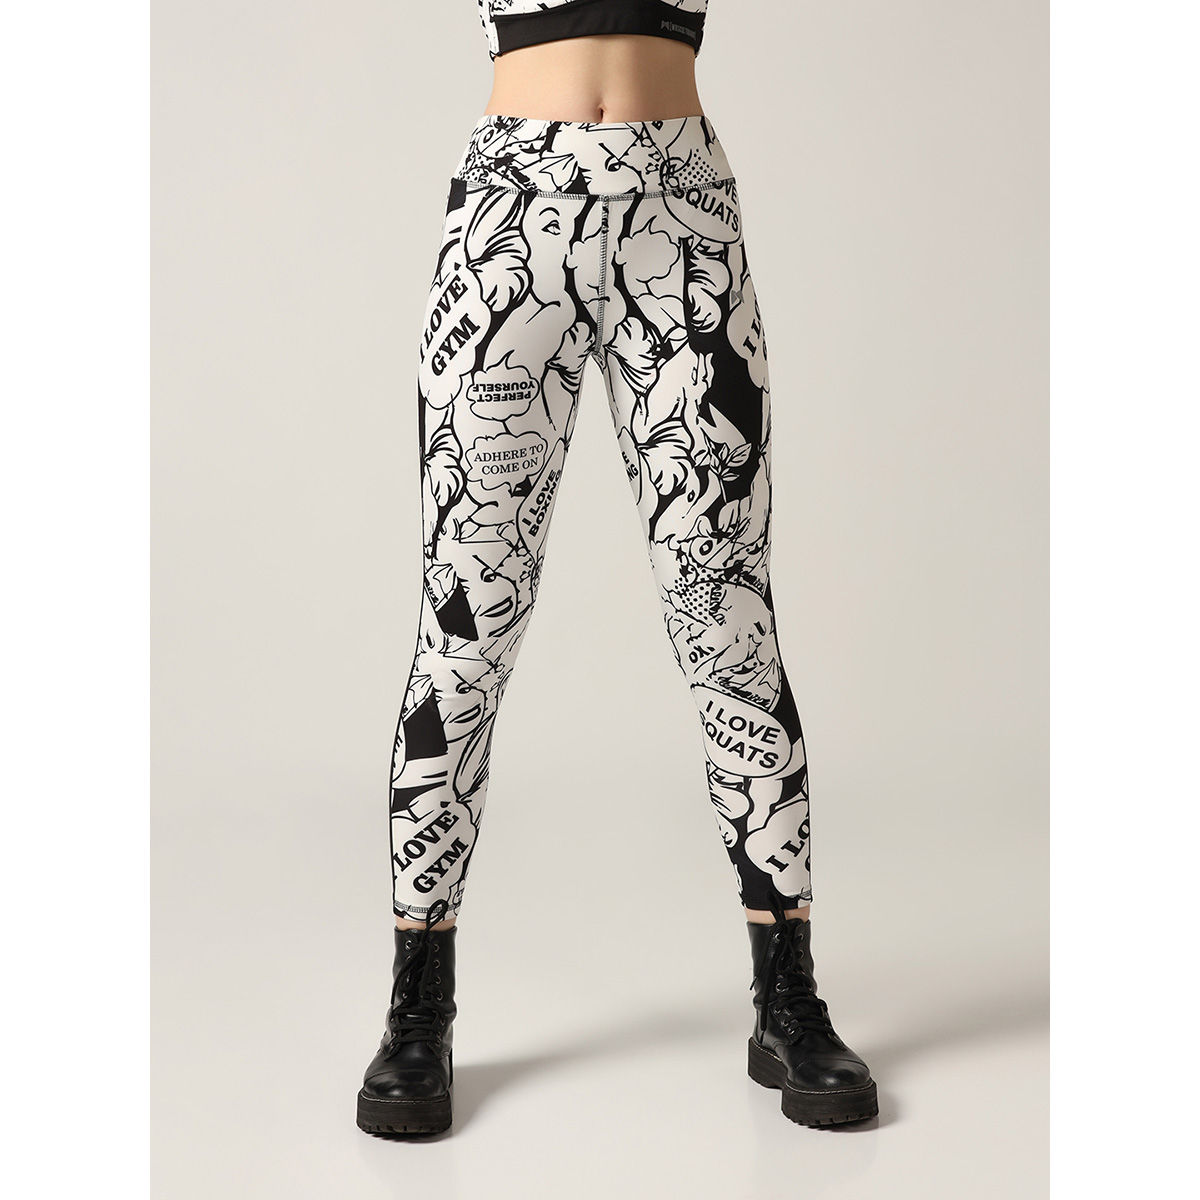 Printed Leggings High Waisted Black and White Color with Checkered Pattern  - Its All Leggings